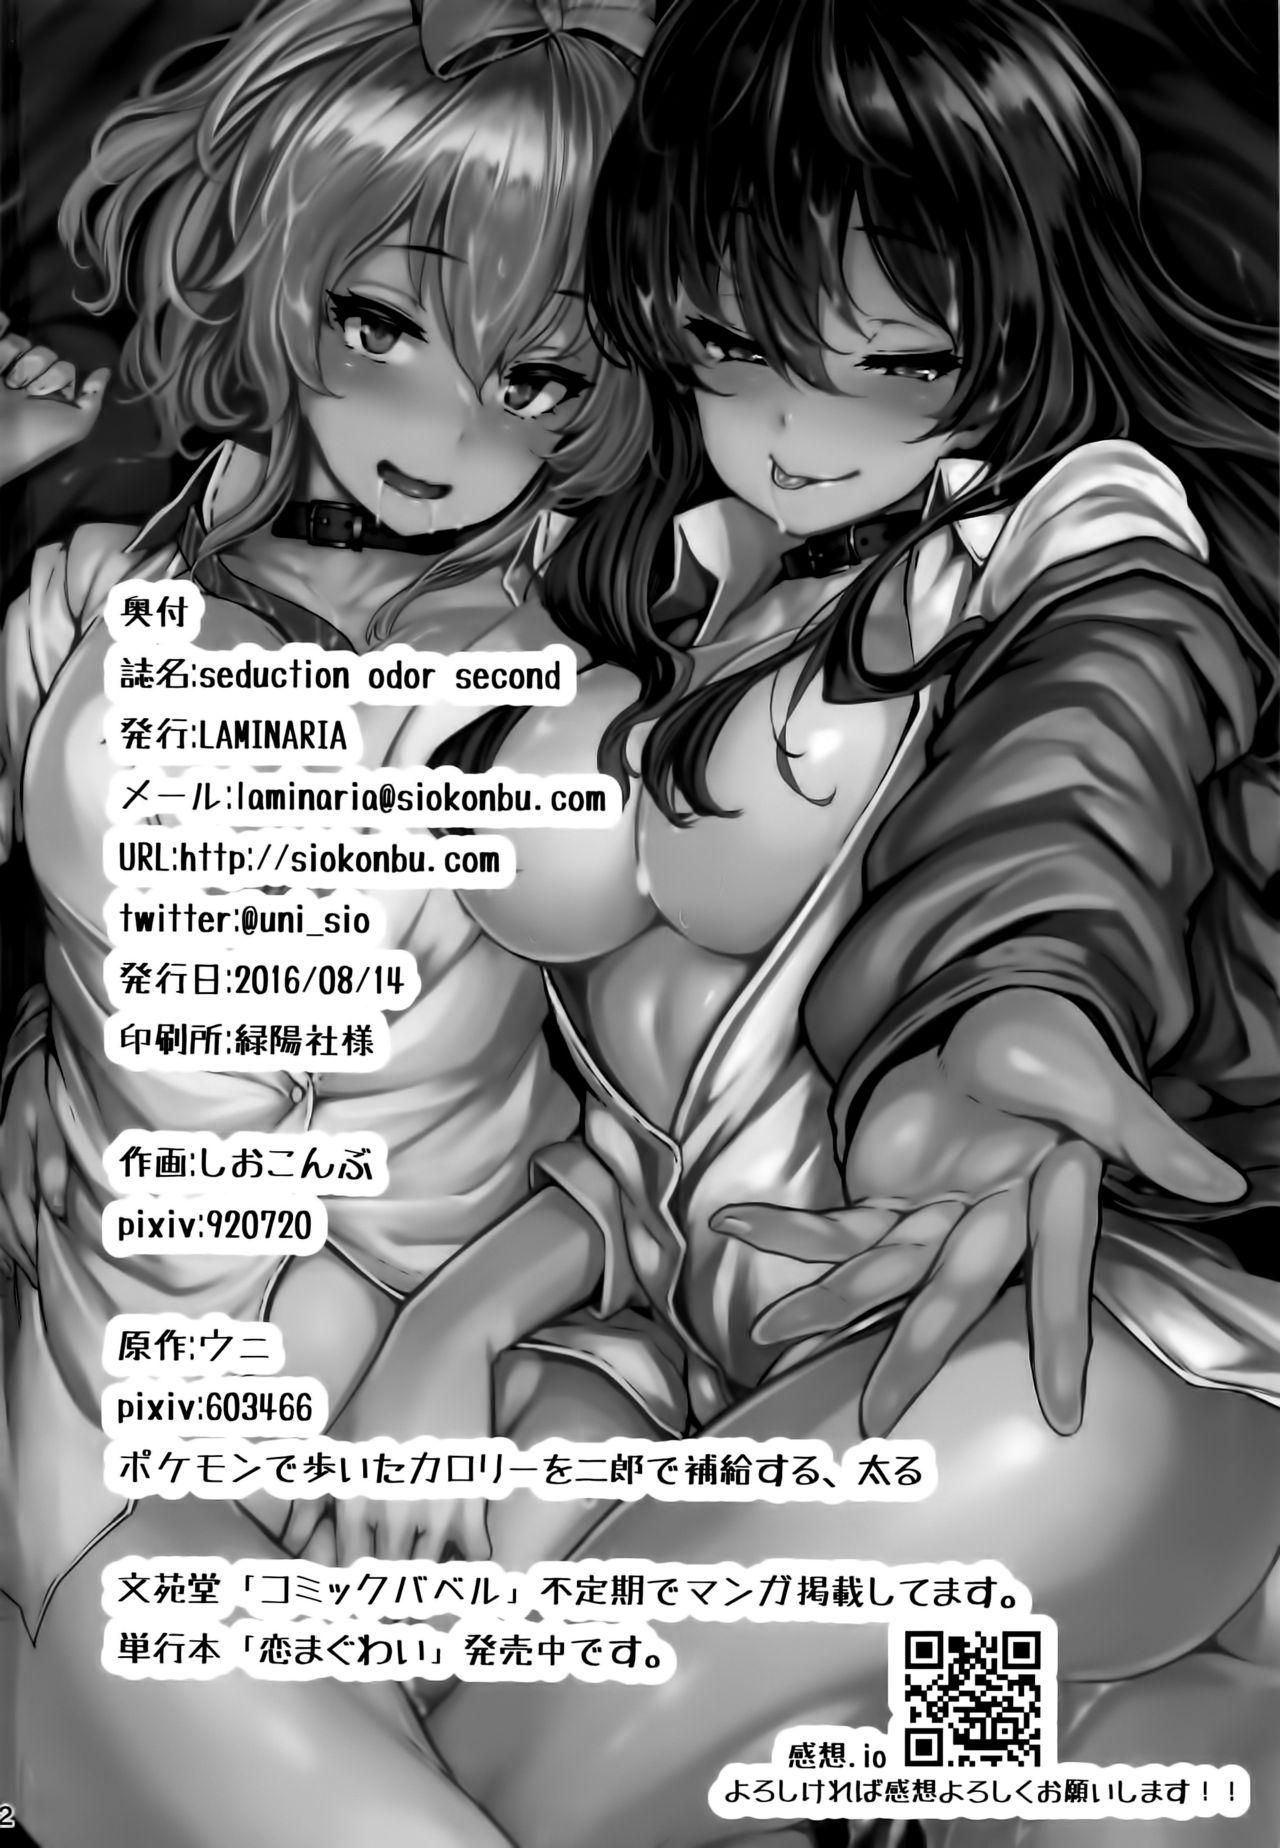 Gaygroupsex seduction odor second - The idolmaster 18 Porn - Page 22